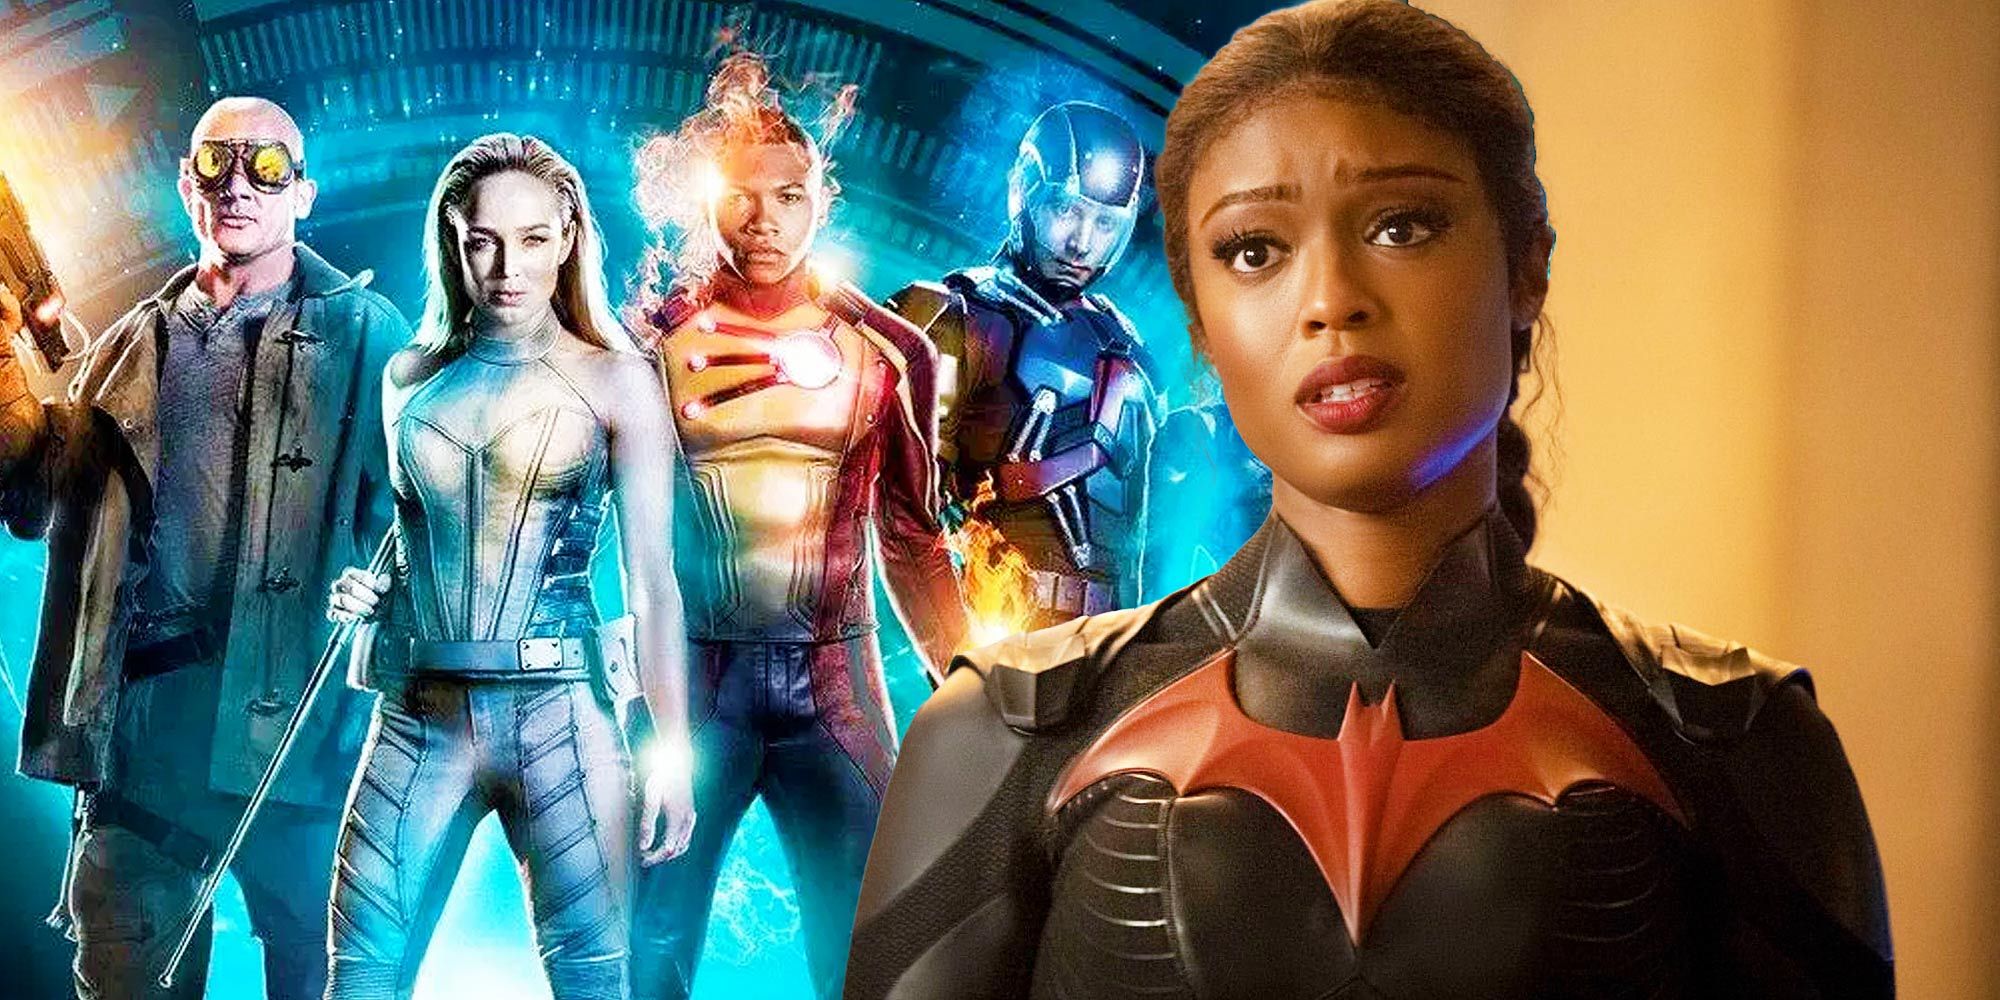 DC's Legends of Tomorrow, Batwoman Both Canceled at The CW